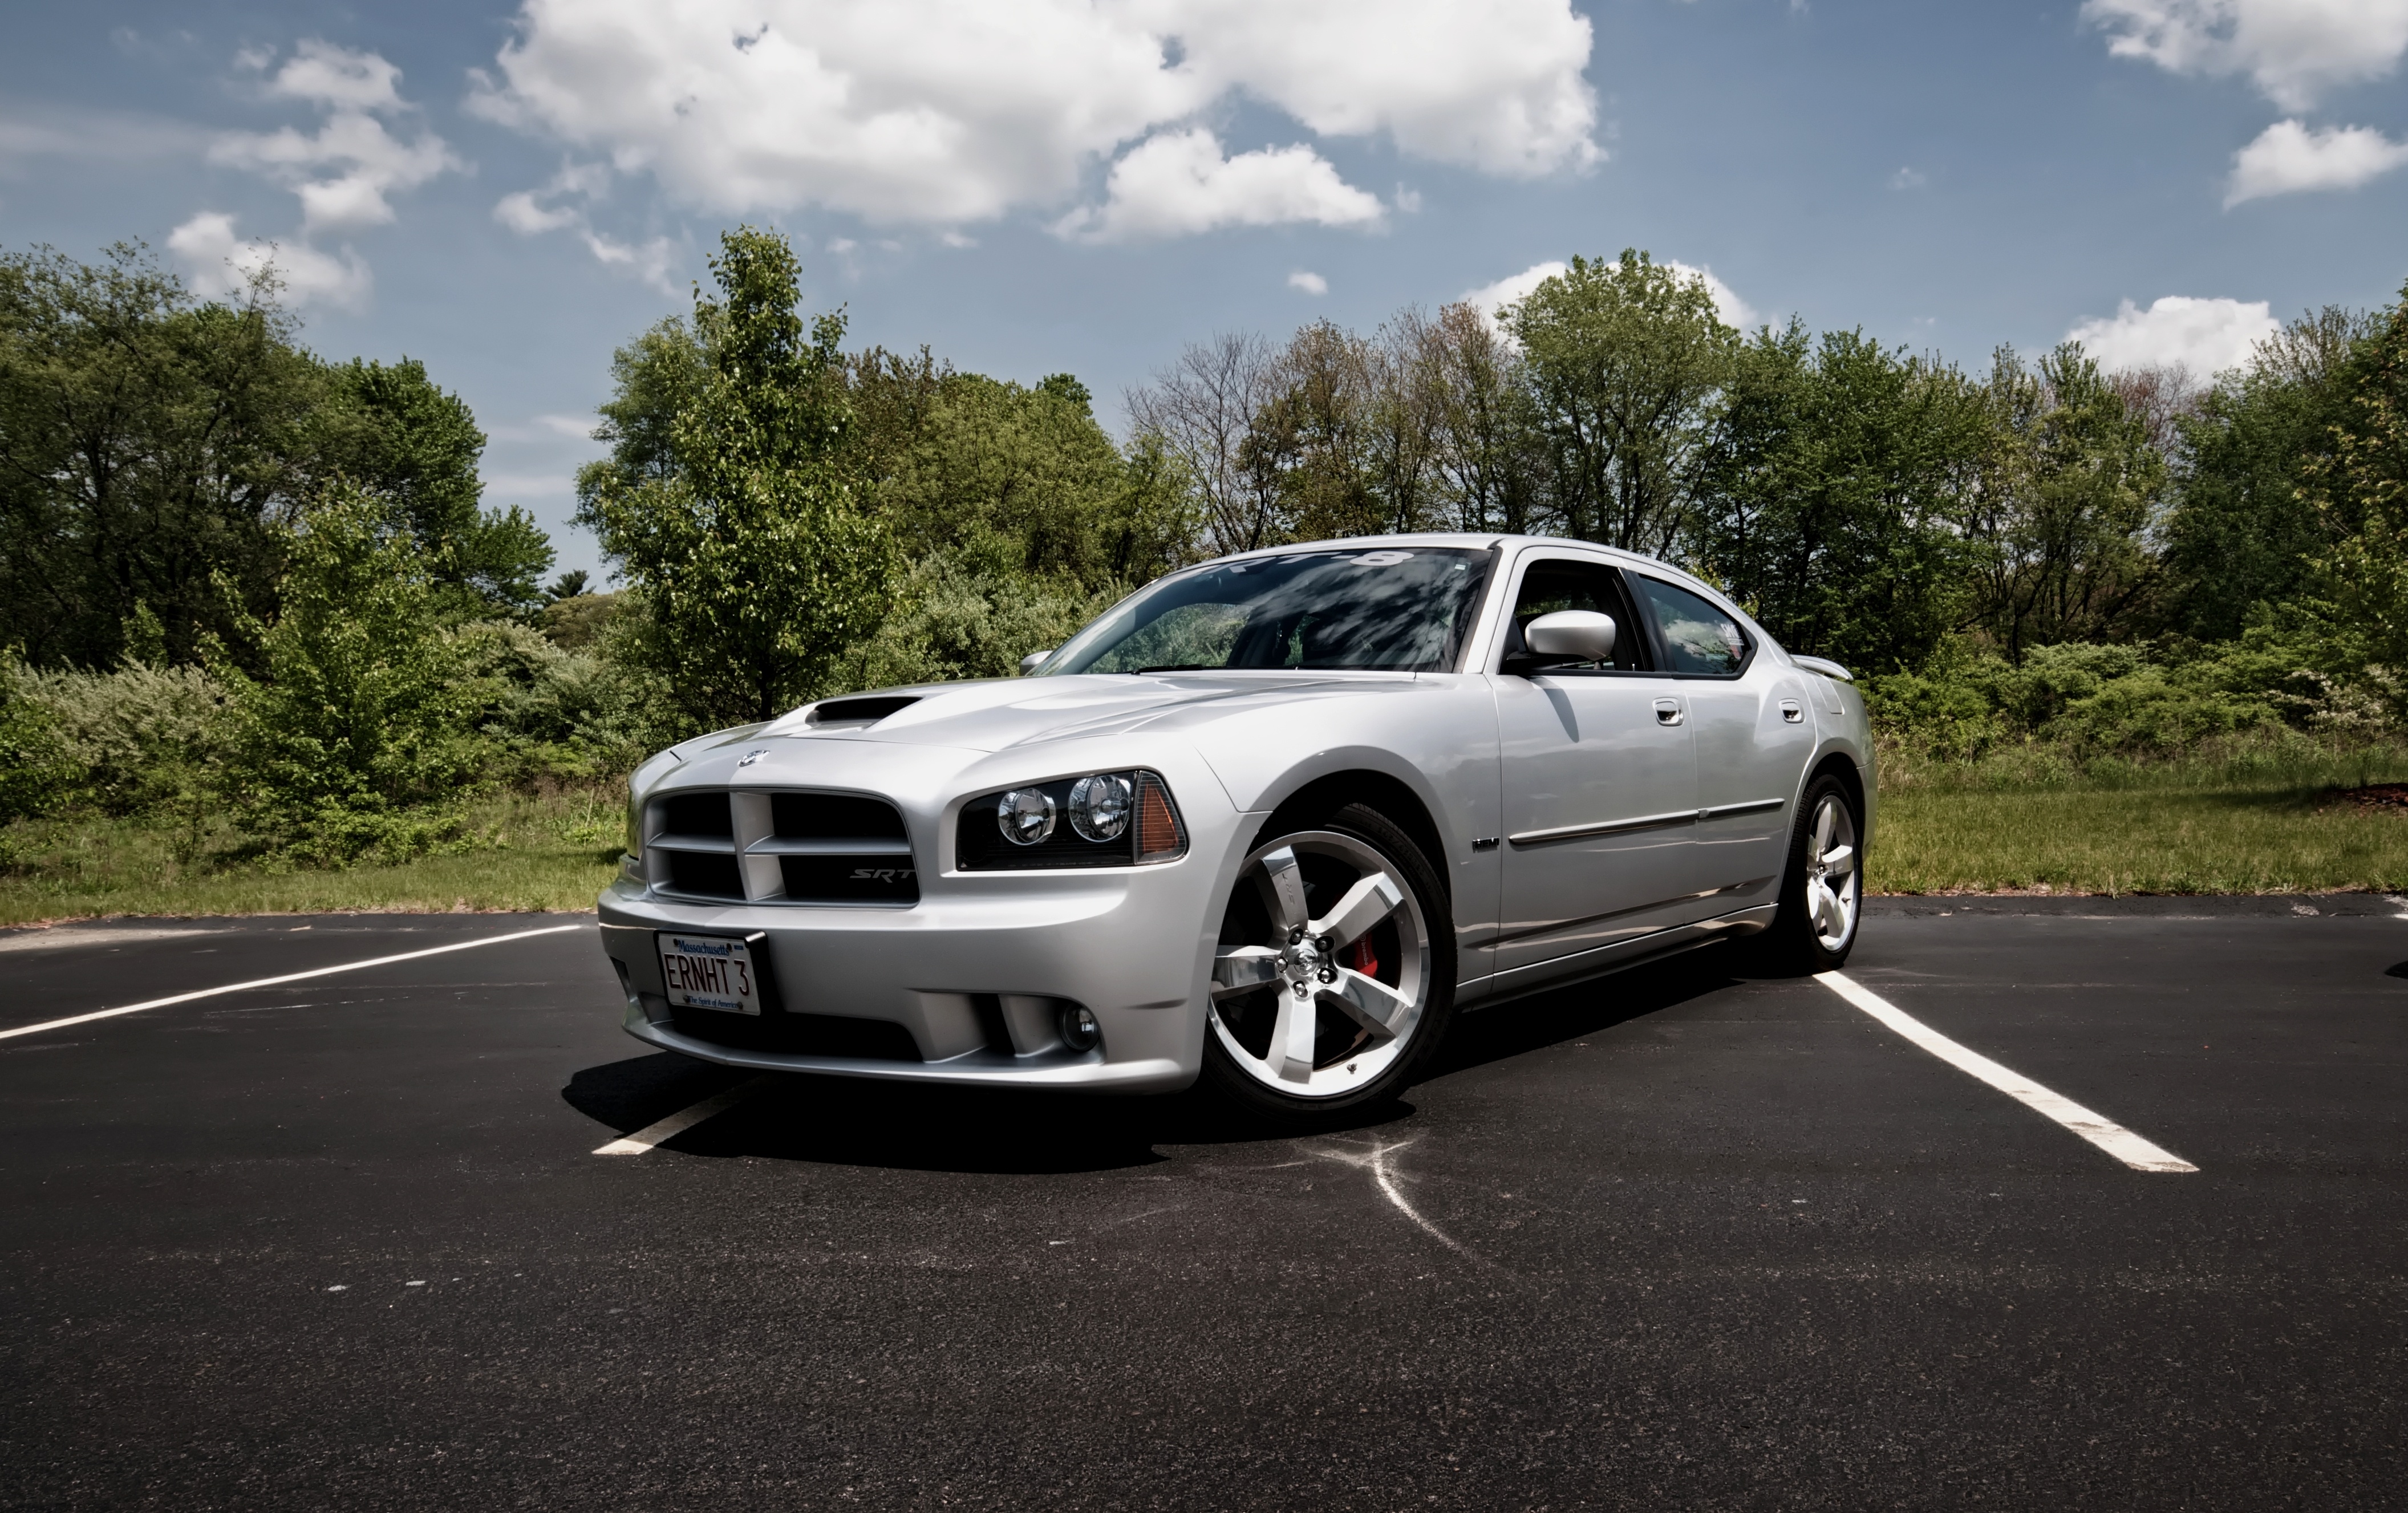 supercar, tuning, cars, silver, dodge charger srt8, cult car, functional hood Panoramic Wallpaper